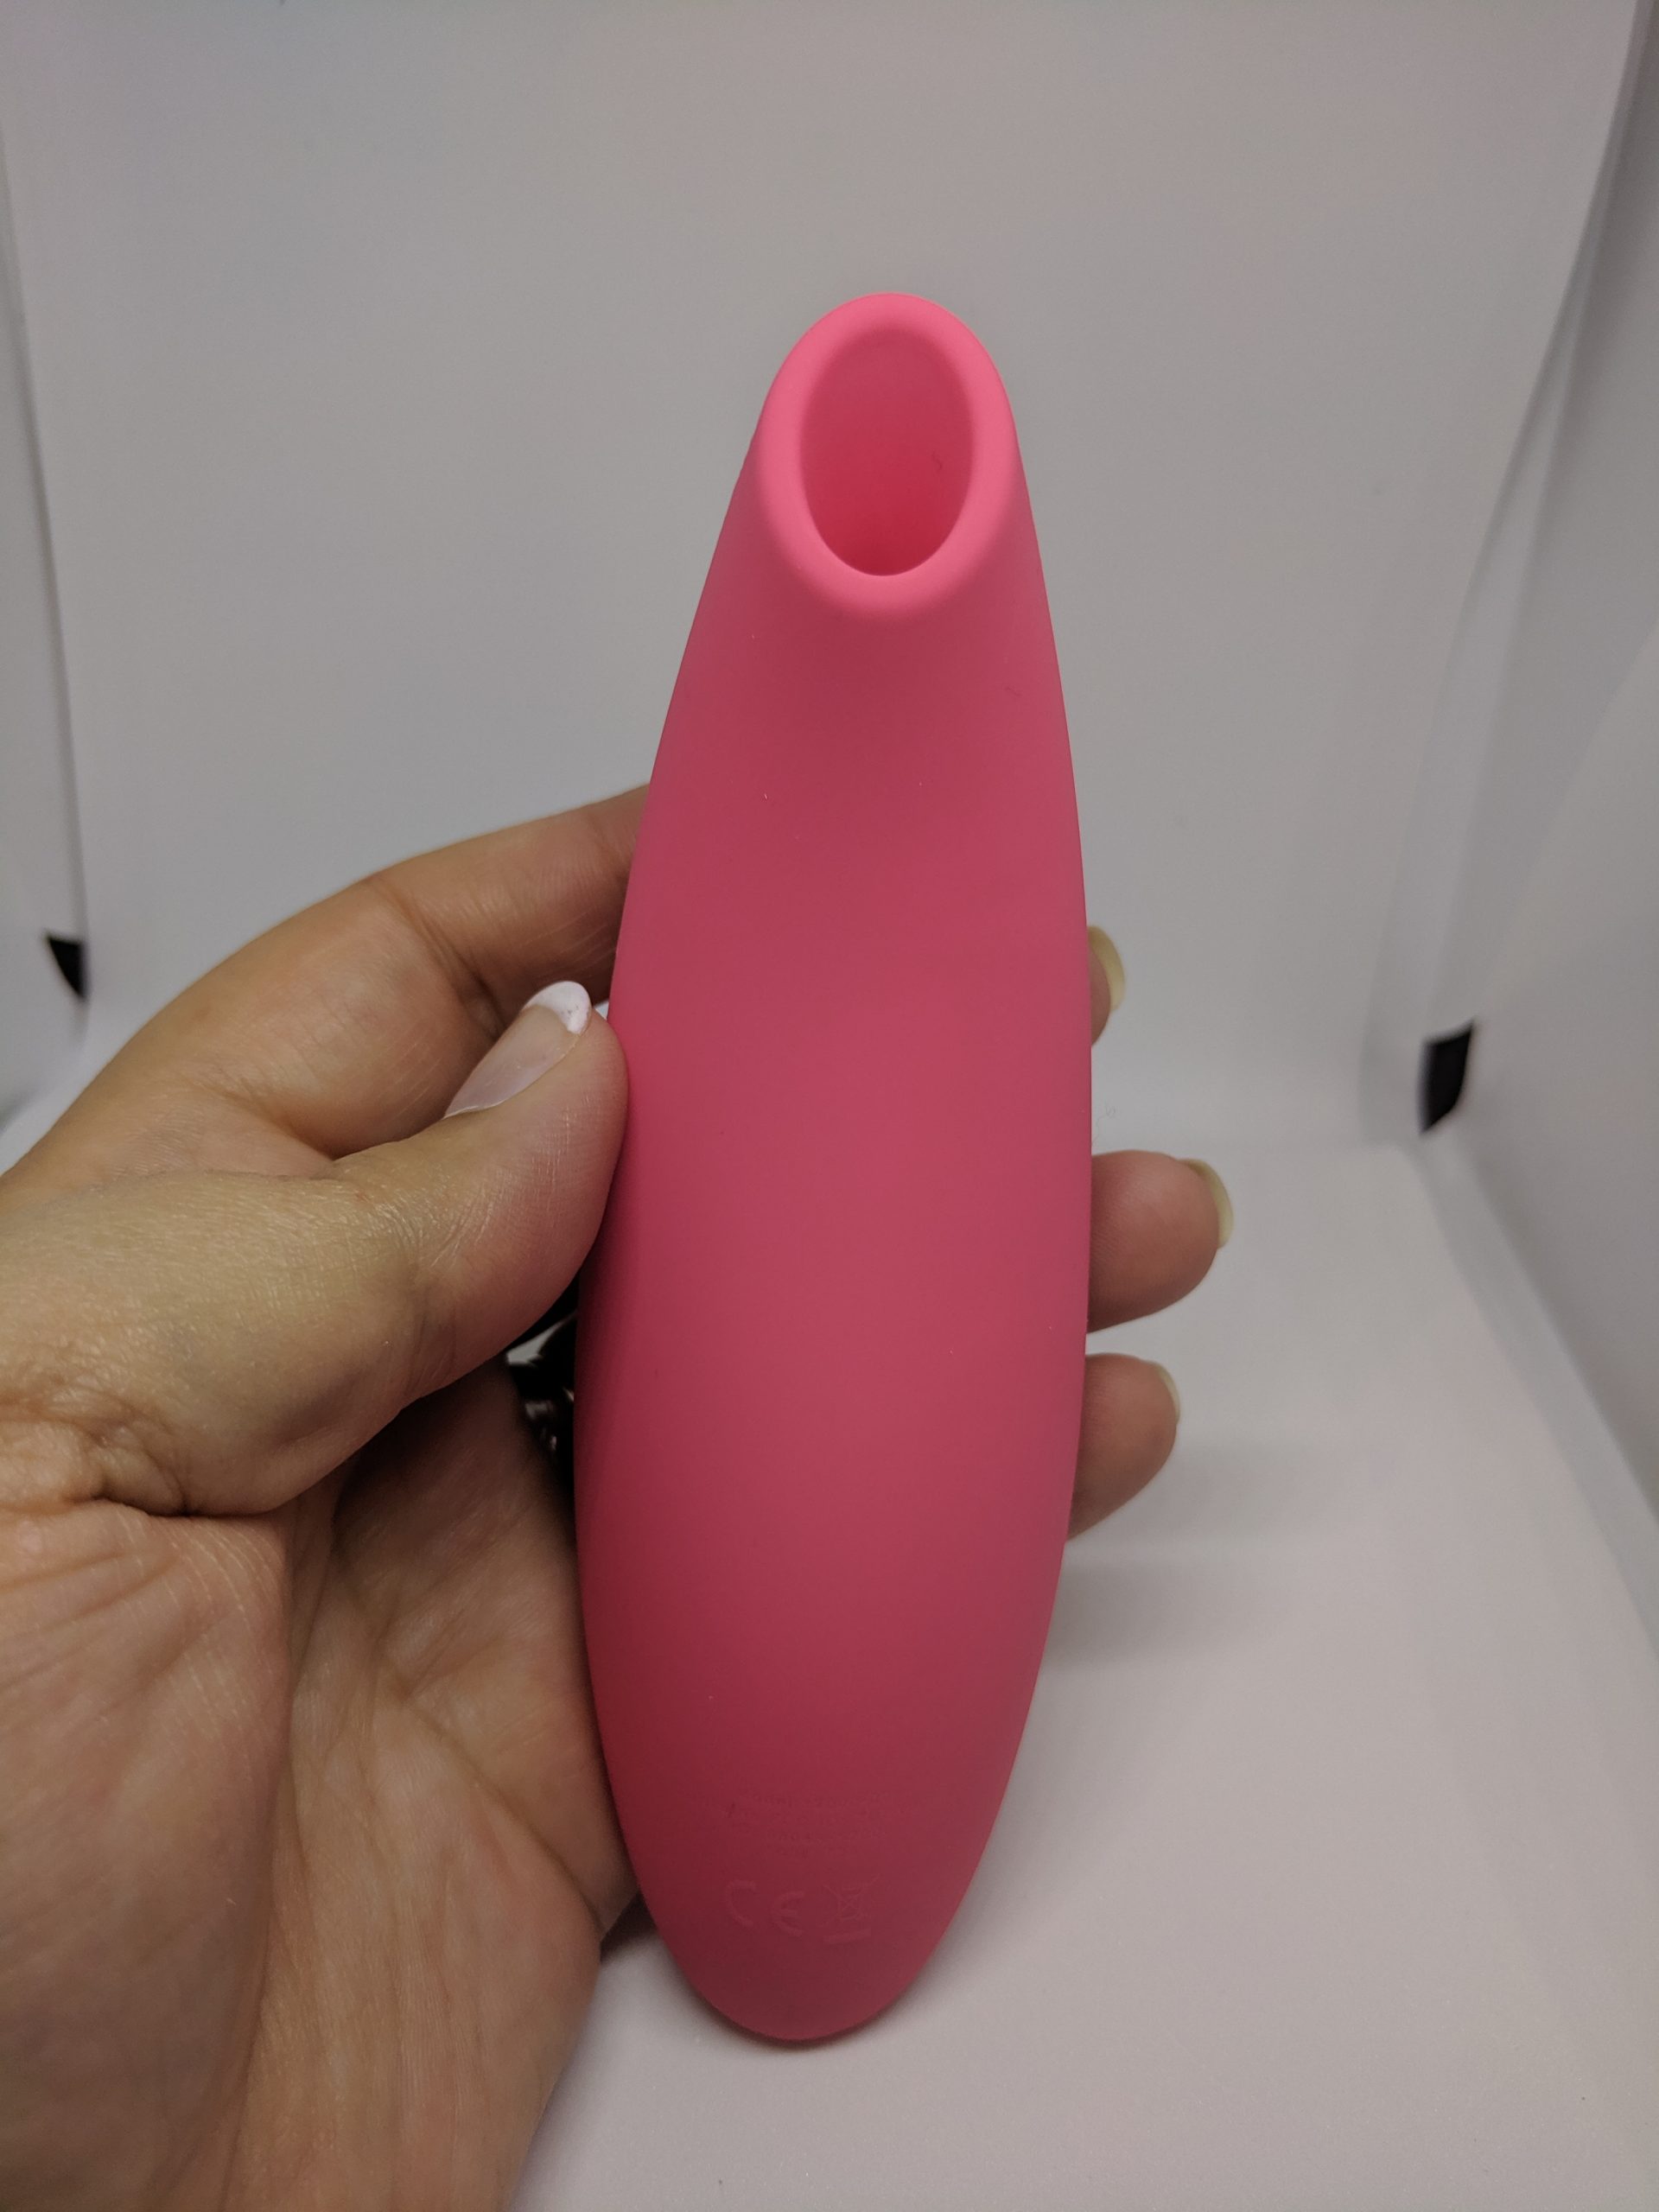 Some Ideas on We-vibe Melt Clitoral Stimulator - Vibrators - Adam & Eve You Need To Know